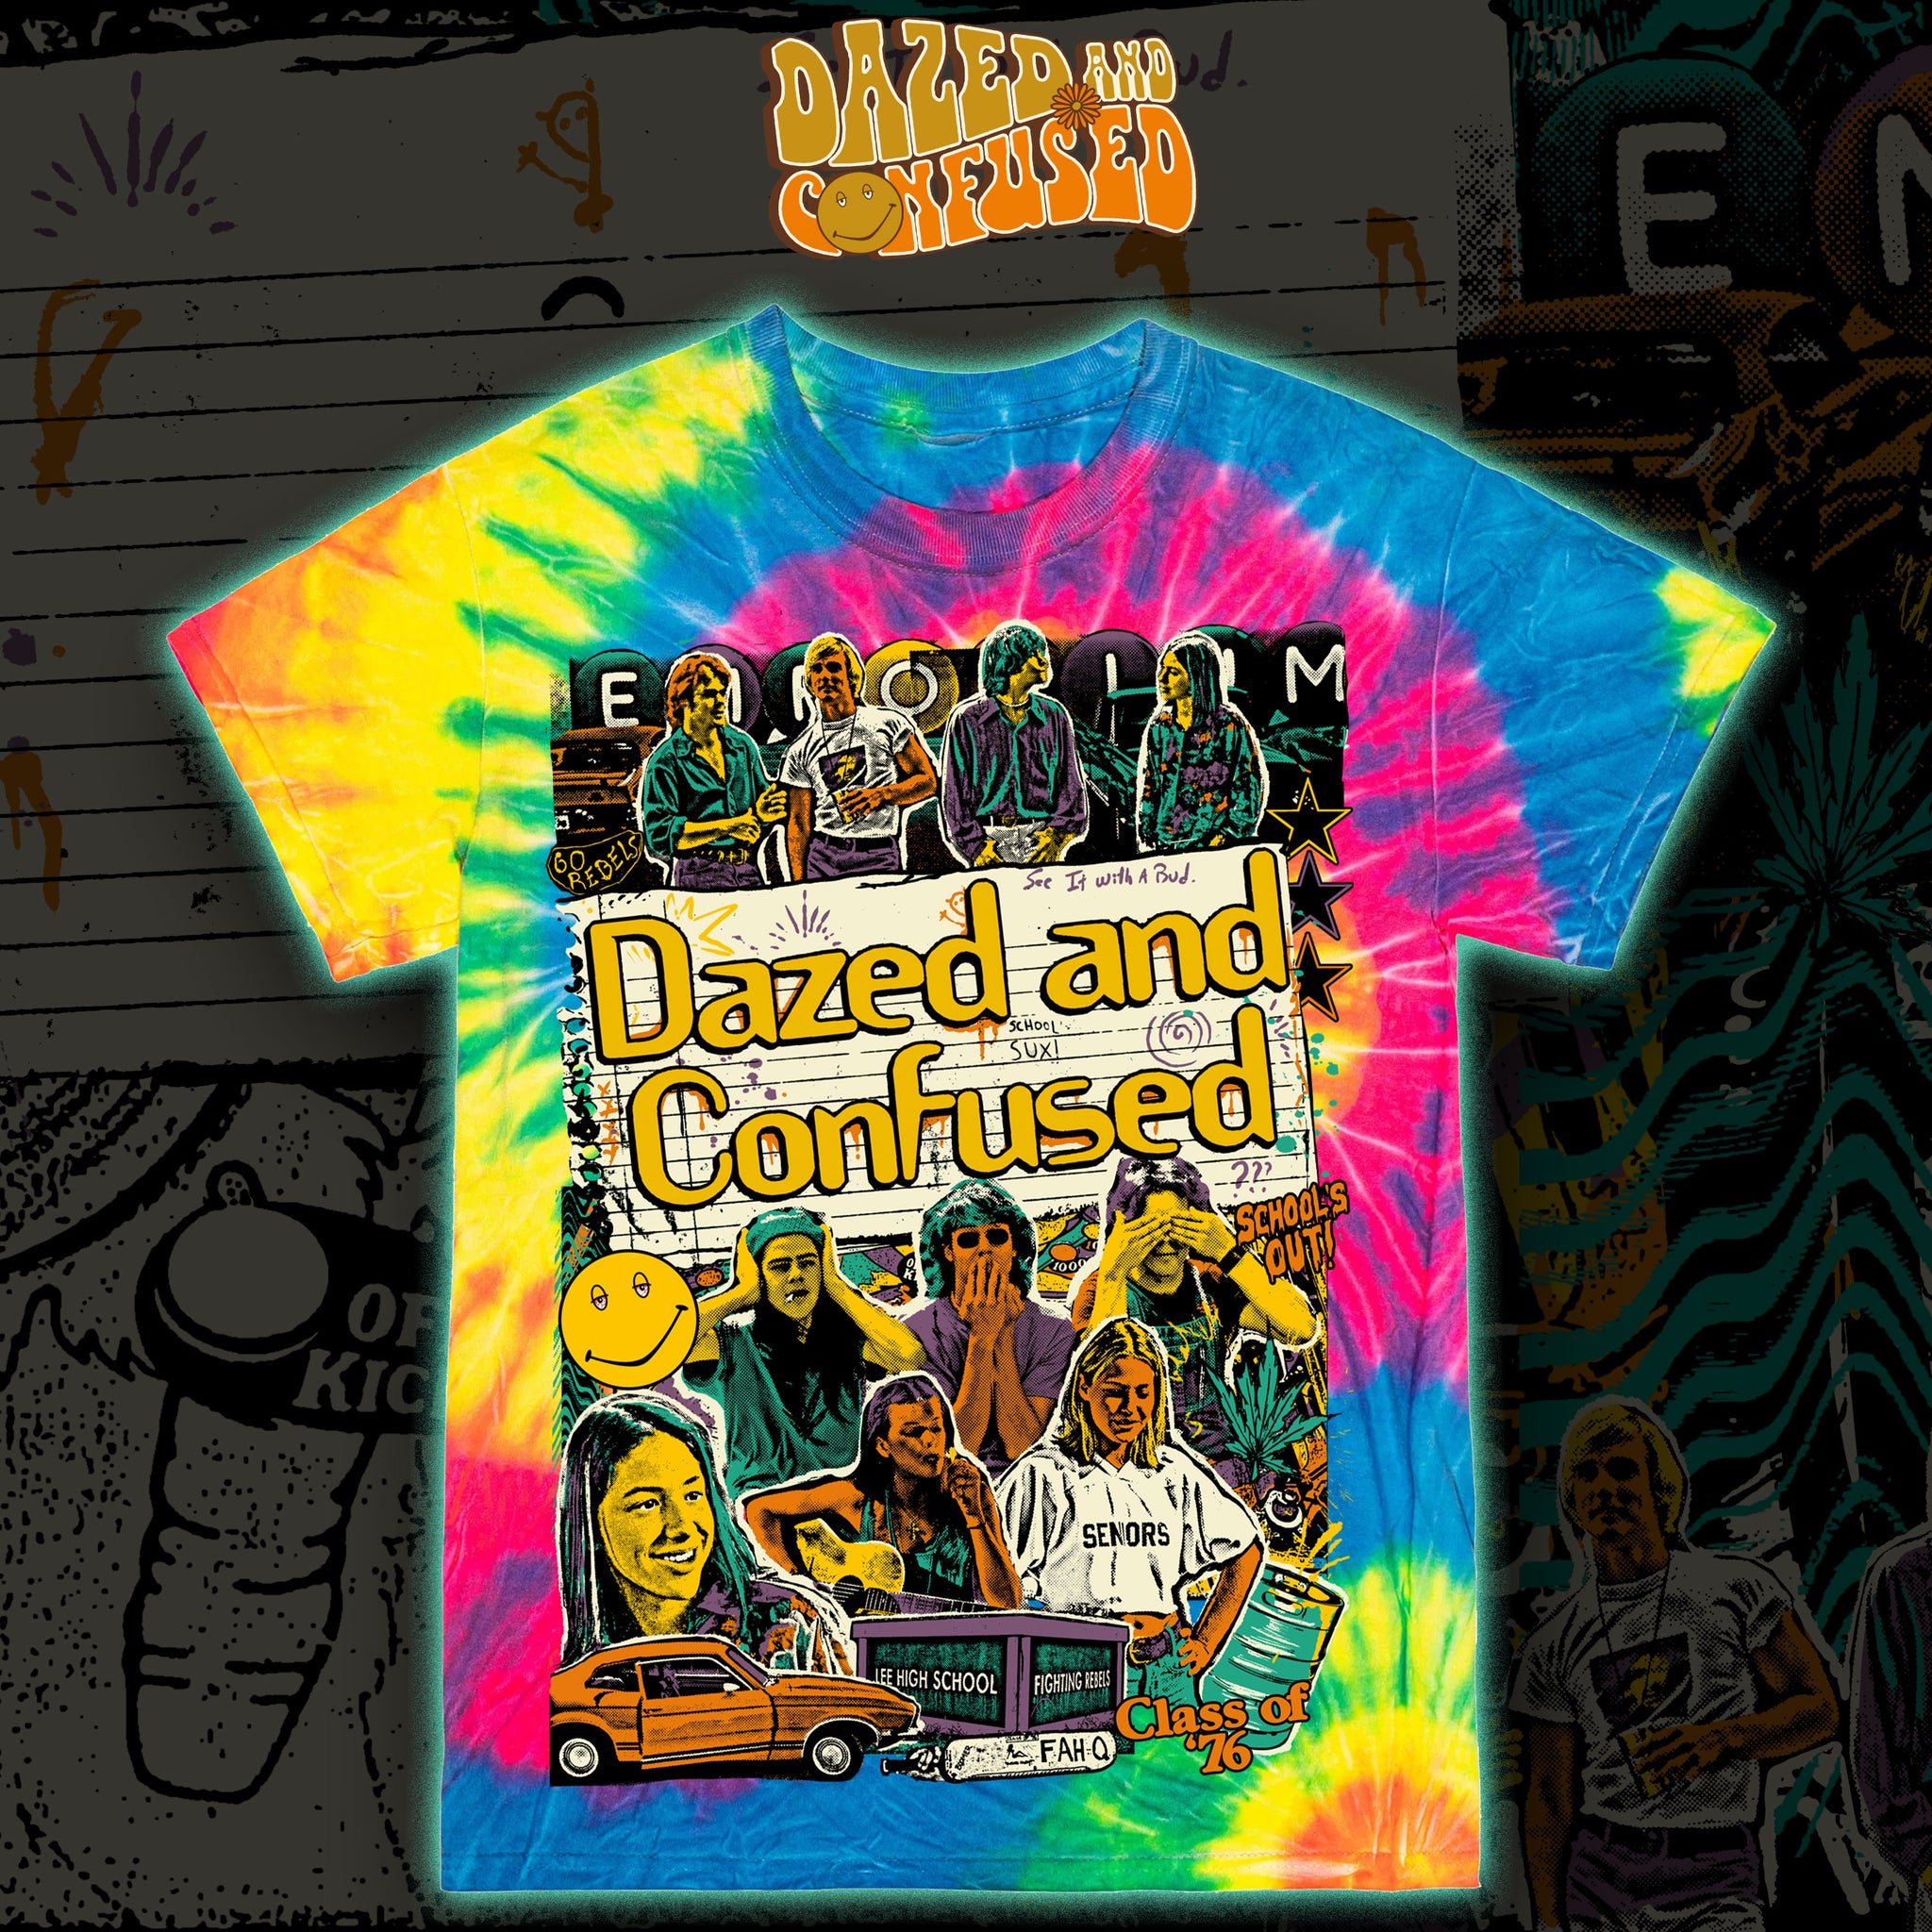 Dazed and Confused "Class of '76" Tie dye